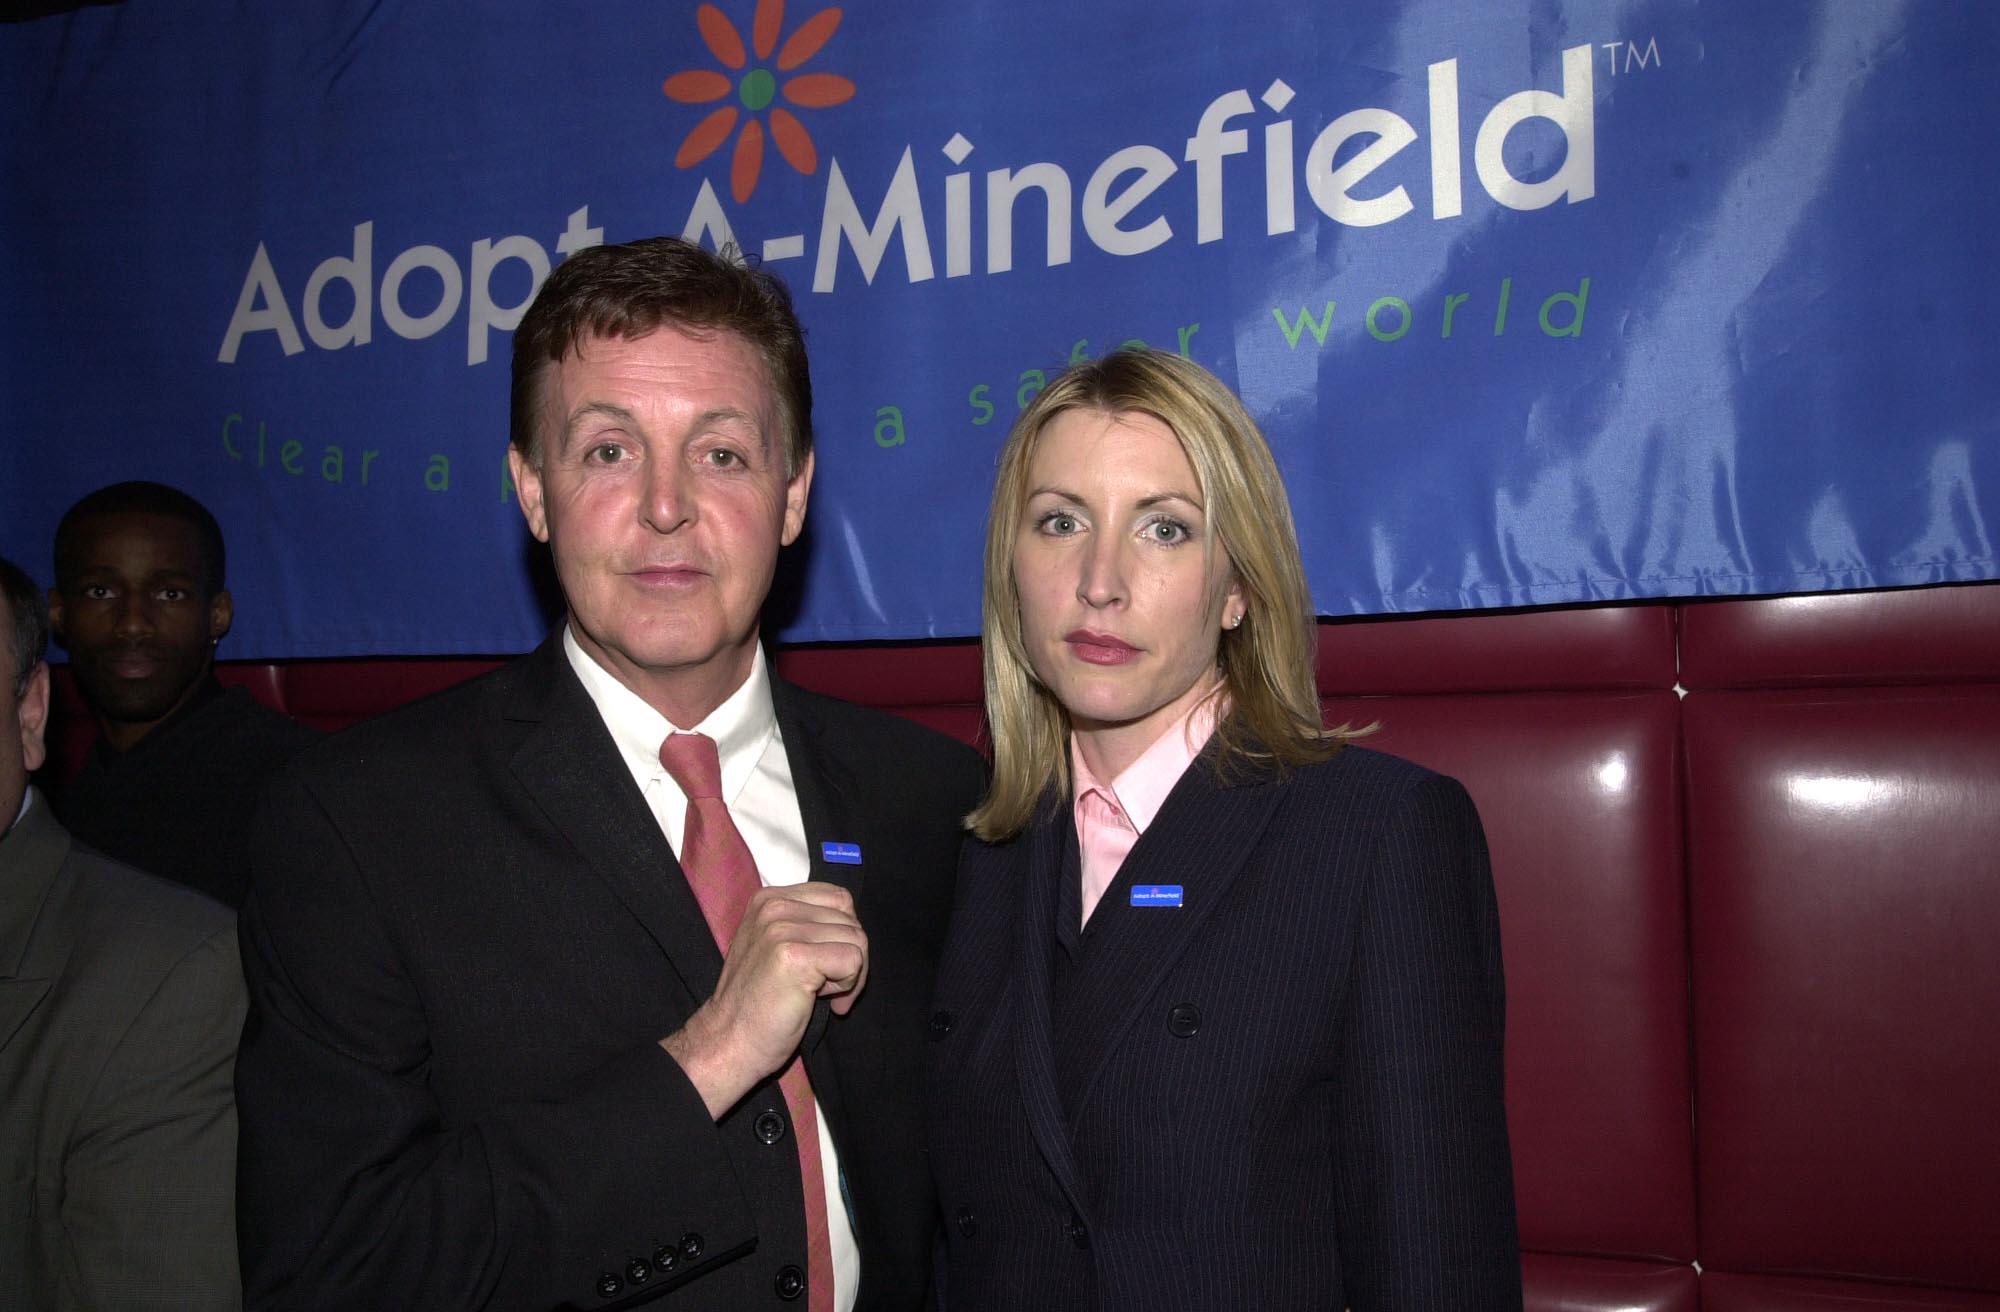 Paul McCartney and Heather Mills attend the "Adopt A Minefield" benefit on April 20, 2001 | Source: Getty Images